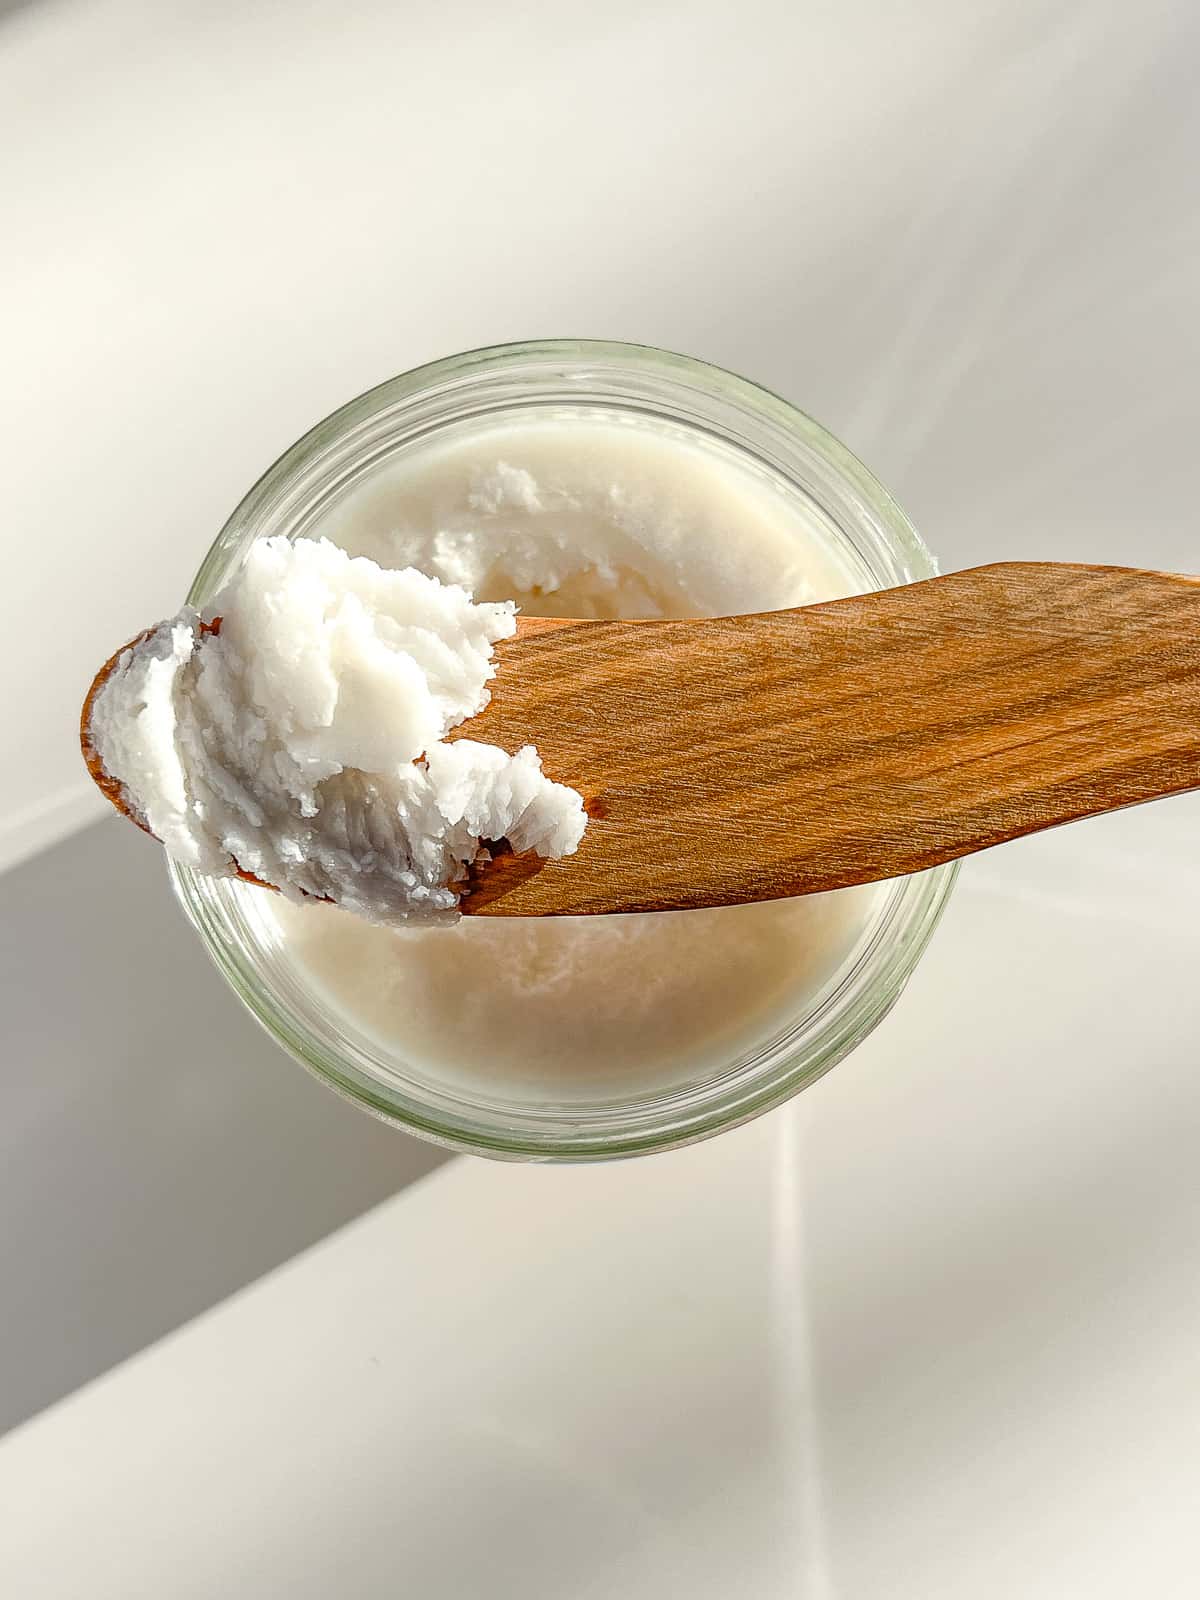 An image of a jar of coconut butter with a wooden spreader on top that has scooped up some of the butter.